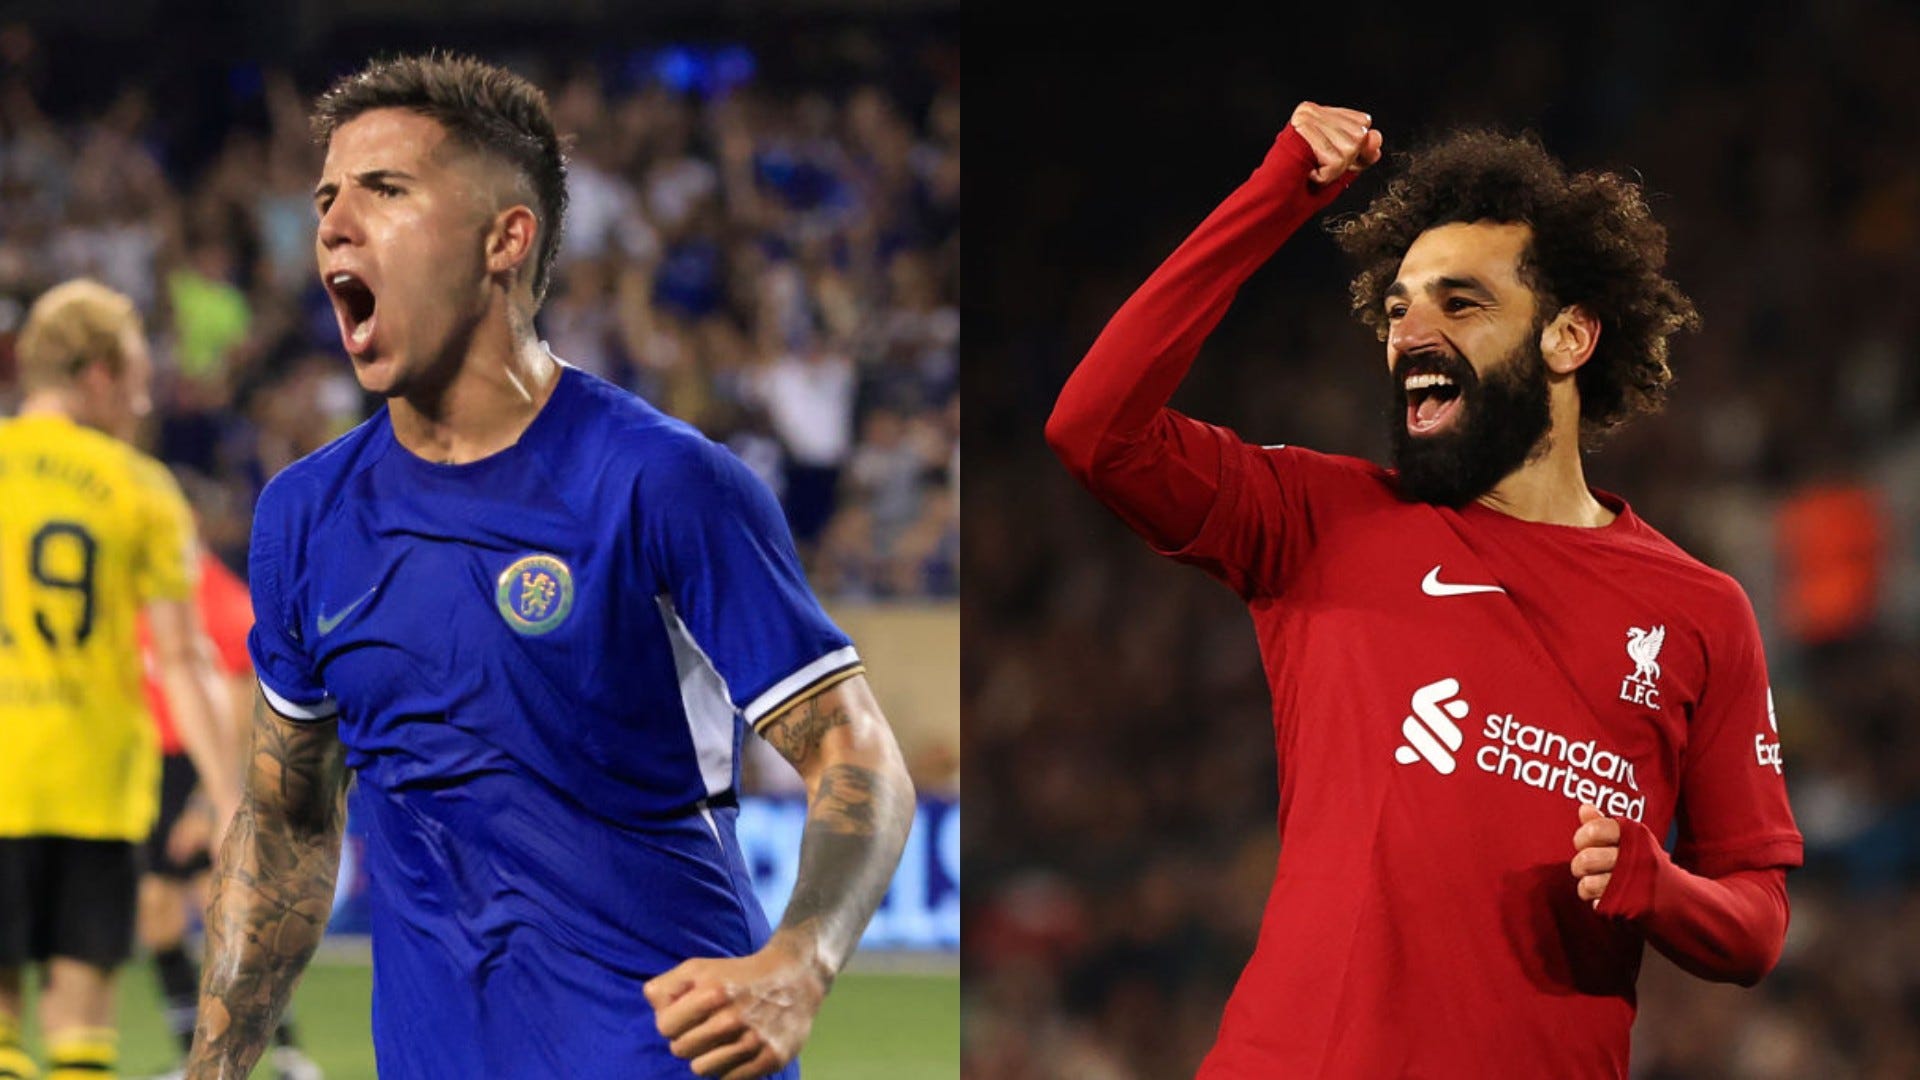 Chelsea vs Liverpool Where to watch the match online, live stream, TV channels, and kick-off time Goal UK